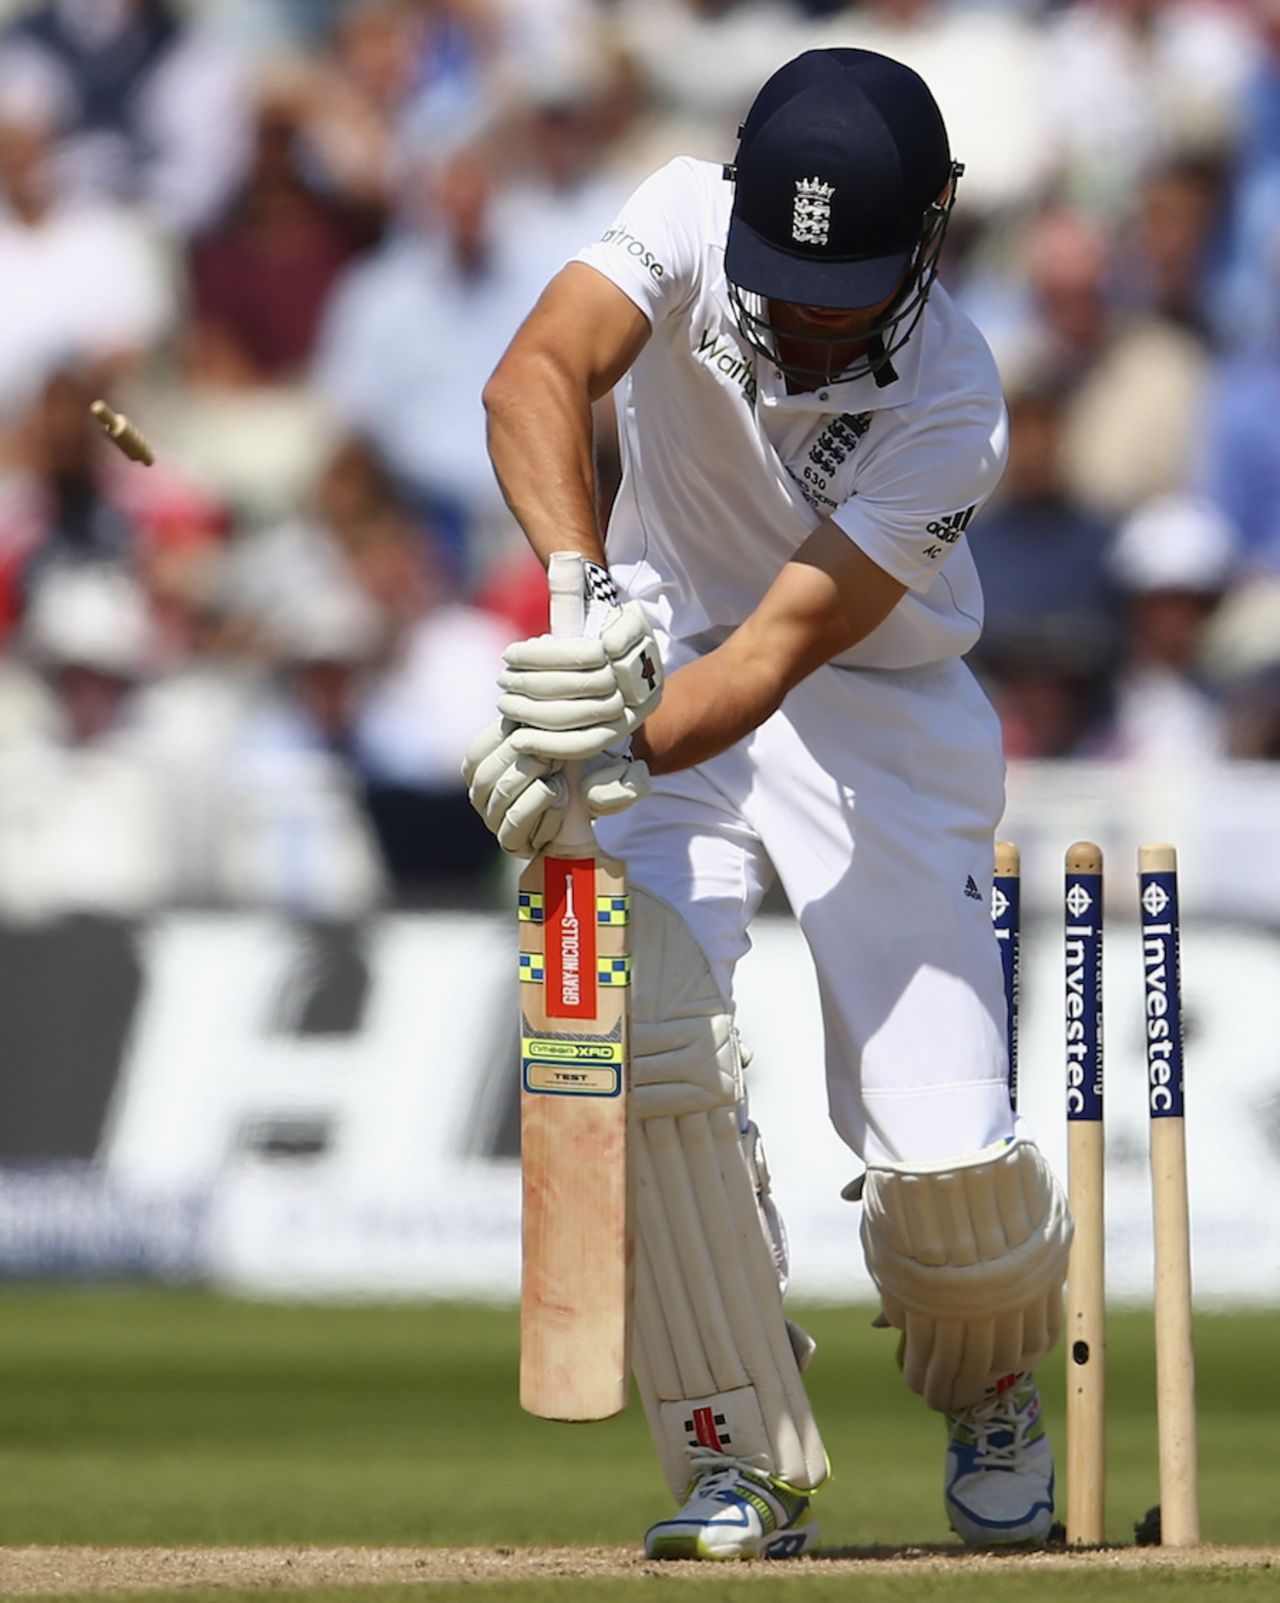 Alastair Cook lost his off stump to a beauty from Mitchell Starc, England v Australia, 3rd Test, Edgbaston, 3rd day, July 31, 2015